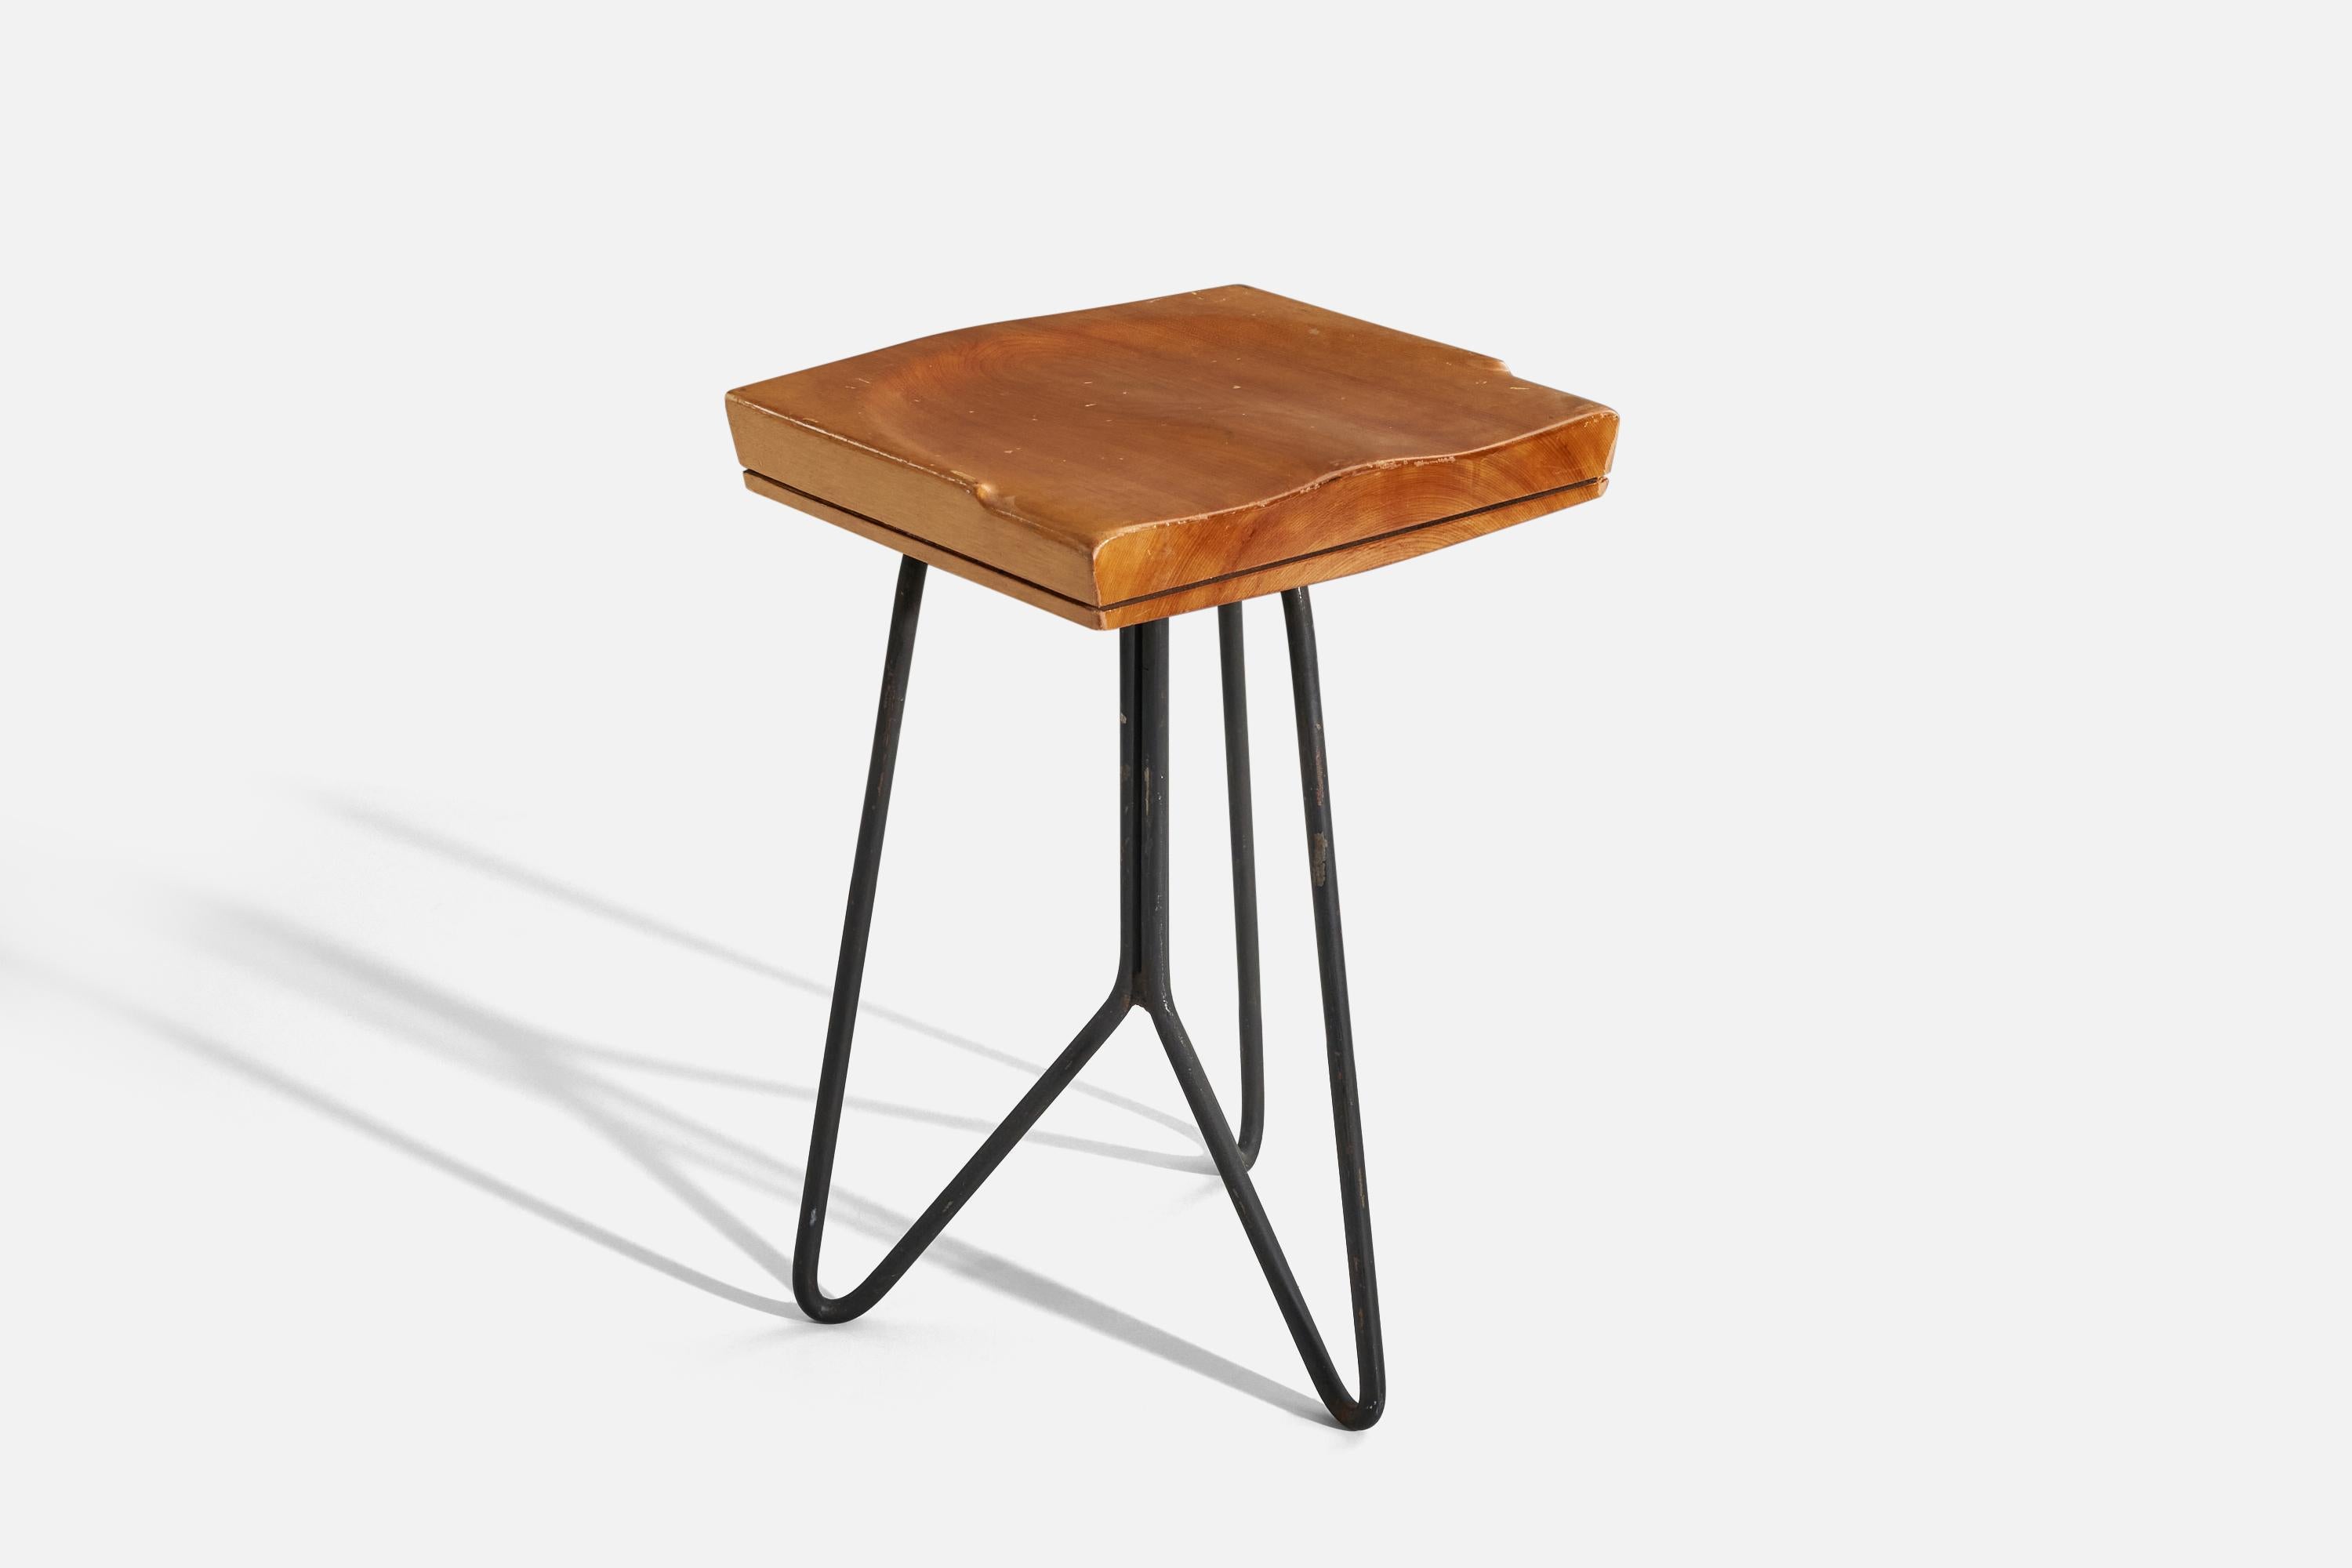 A wood and metal stool designed and produced in the United States, 1950s.